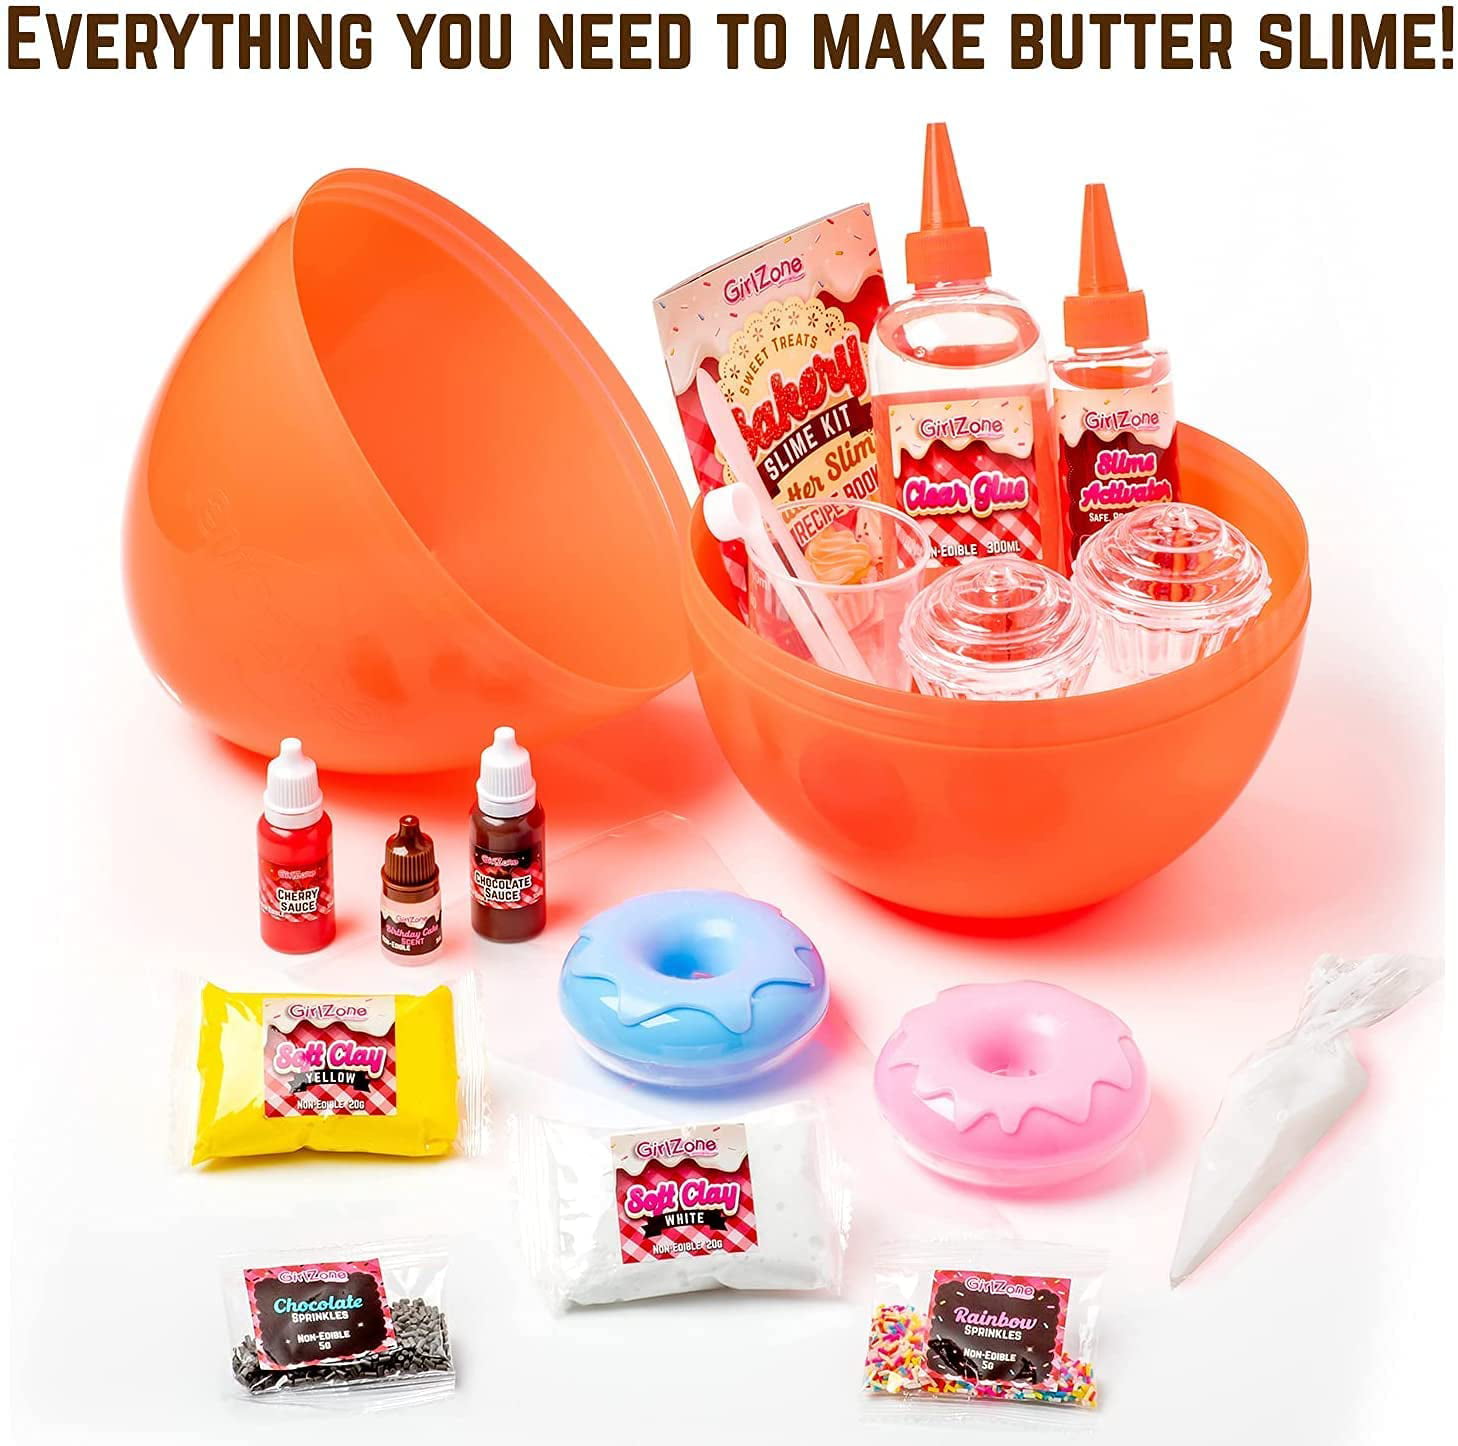 GirlZone Sweet Treats Butter Slime Bakery Kit, Everything in One Egg to Make Scented Slime, Slime Butter and Birthday Cake Scented Slime in One Butter